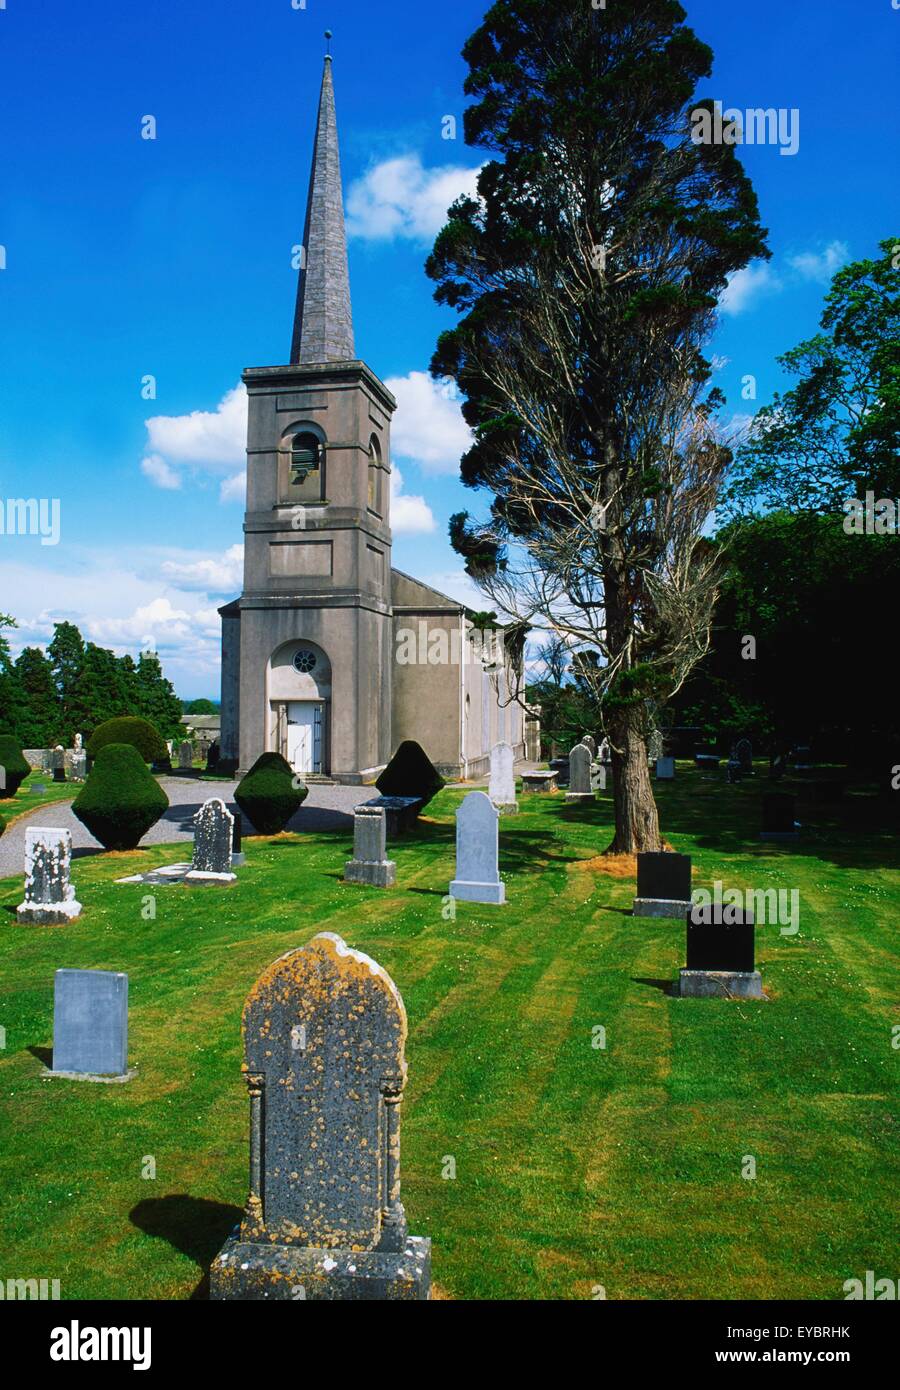 Church Of St. John The Baptist, Coolbanagher, County Laois, Ireland; Church Built By James Gandon In 1786 Stock Photo